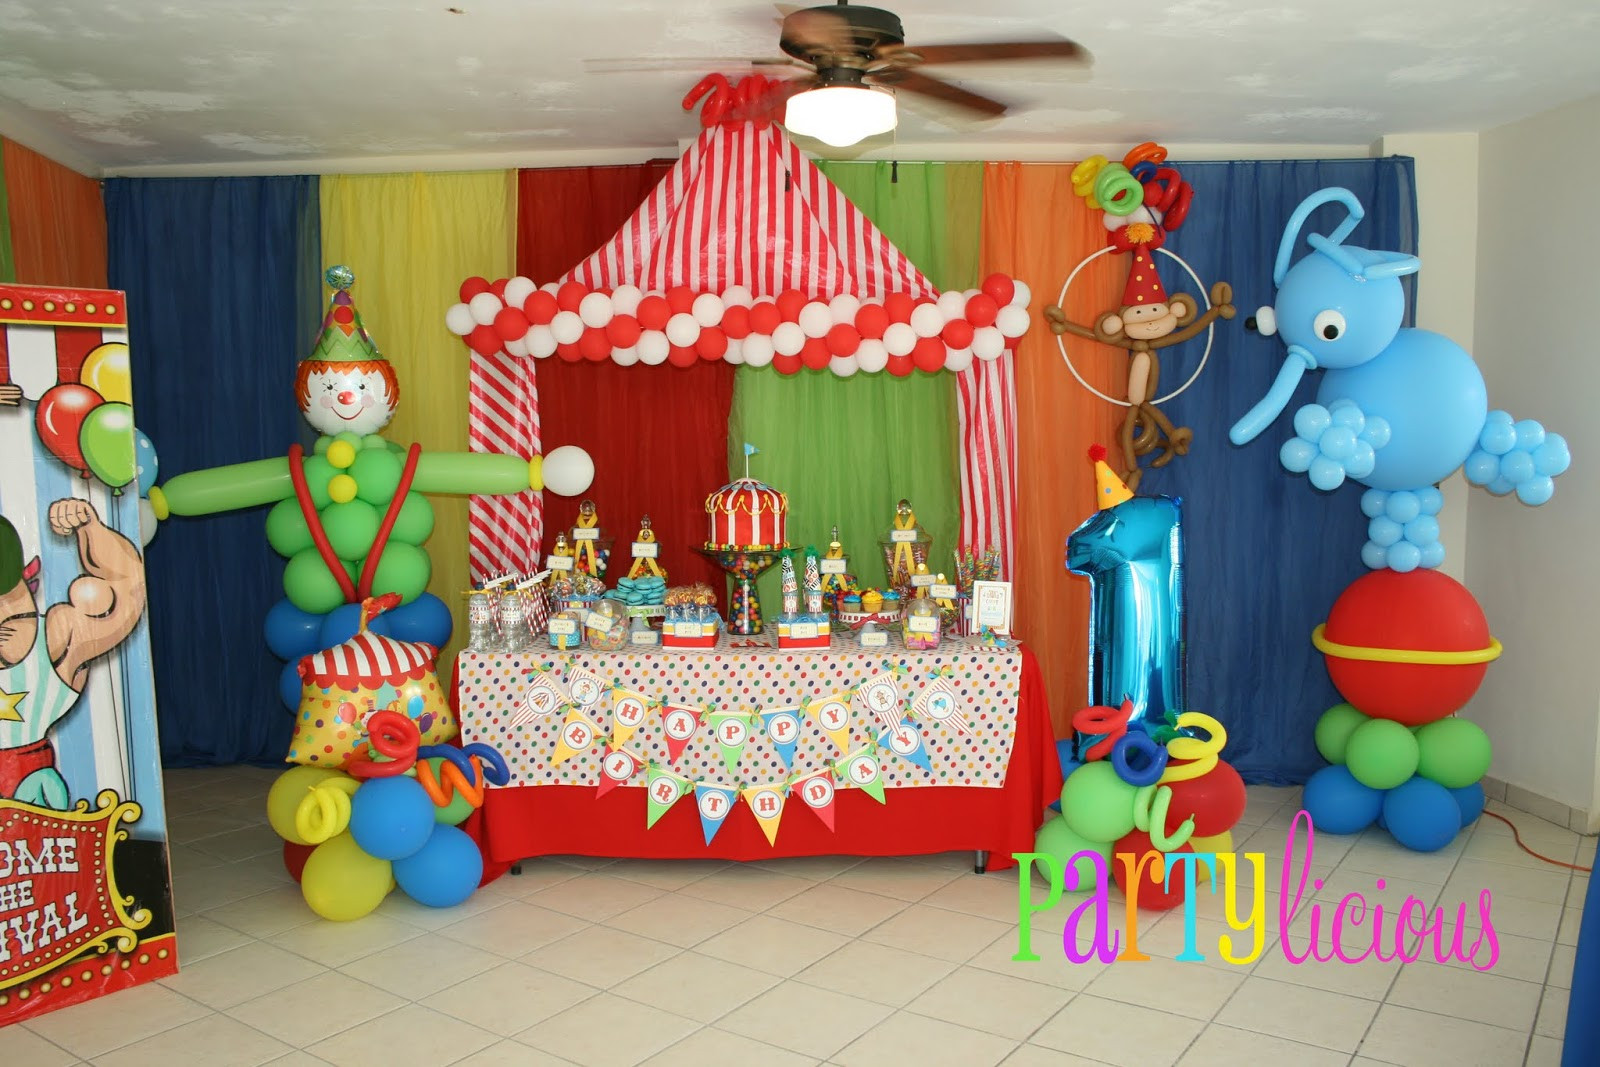 Circus Birthday Party Decorations
 Partylicious Events PR Circus Spectacular Birthday